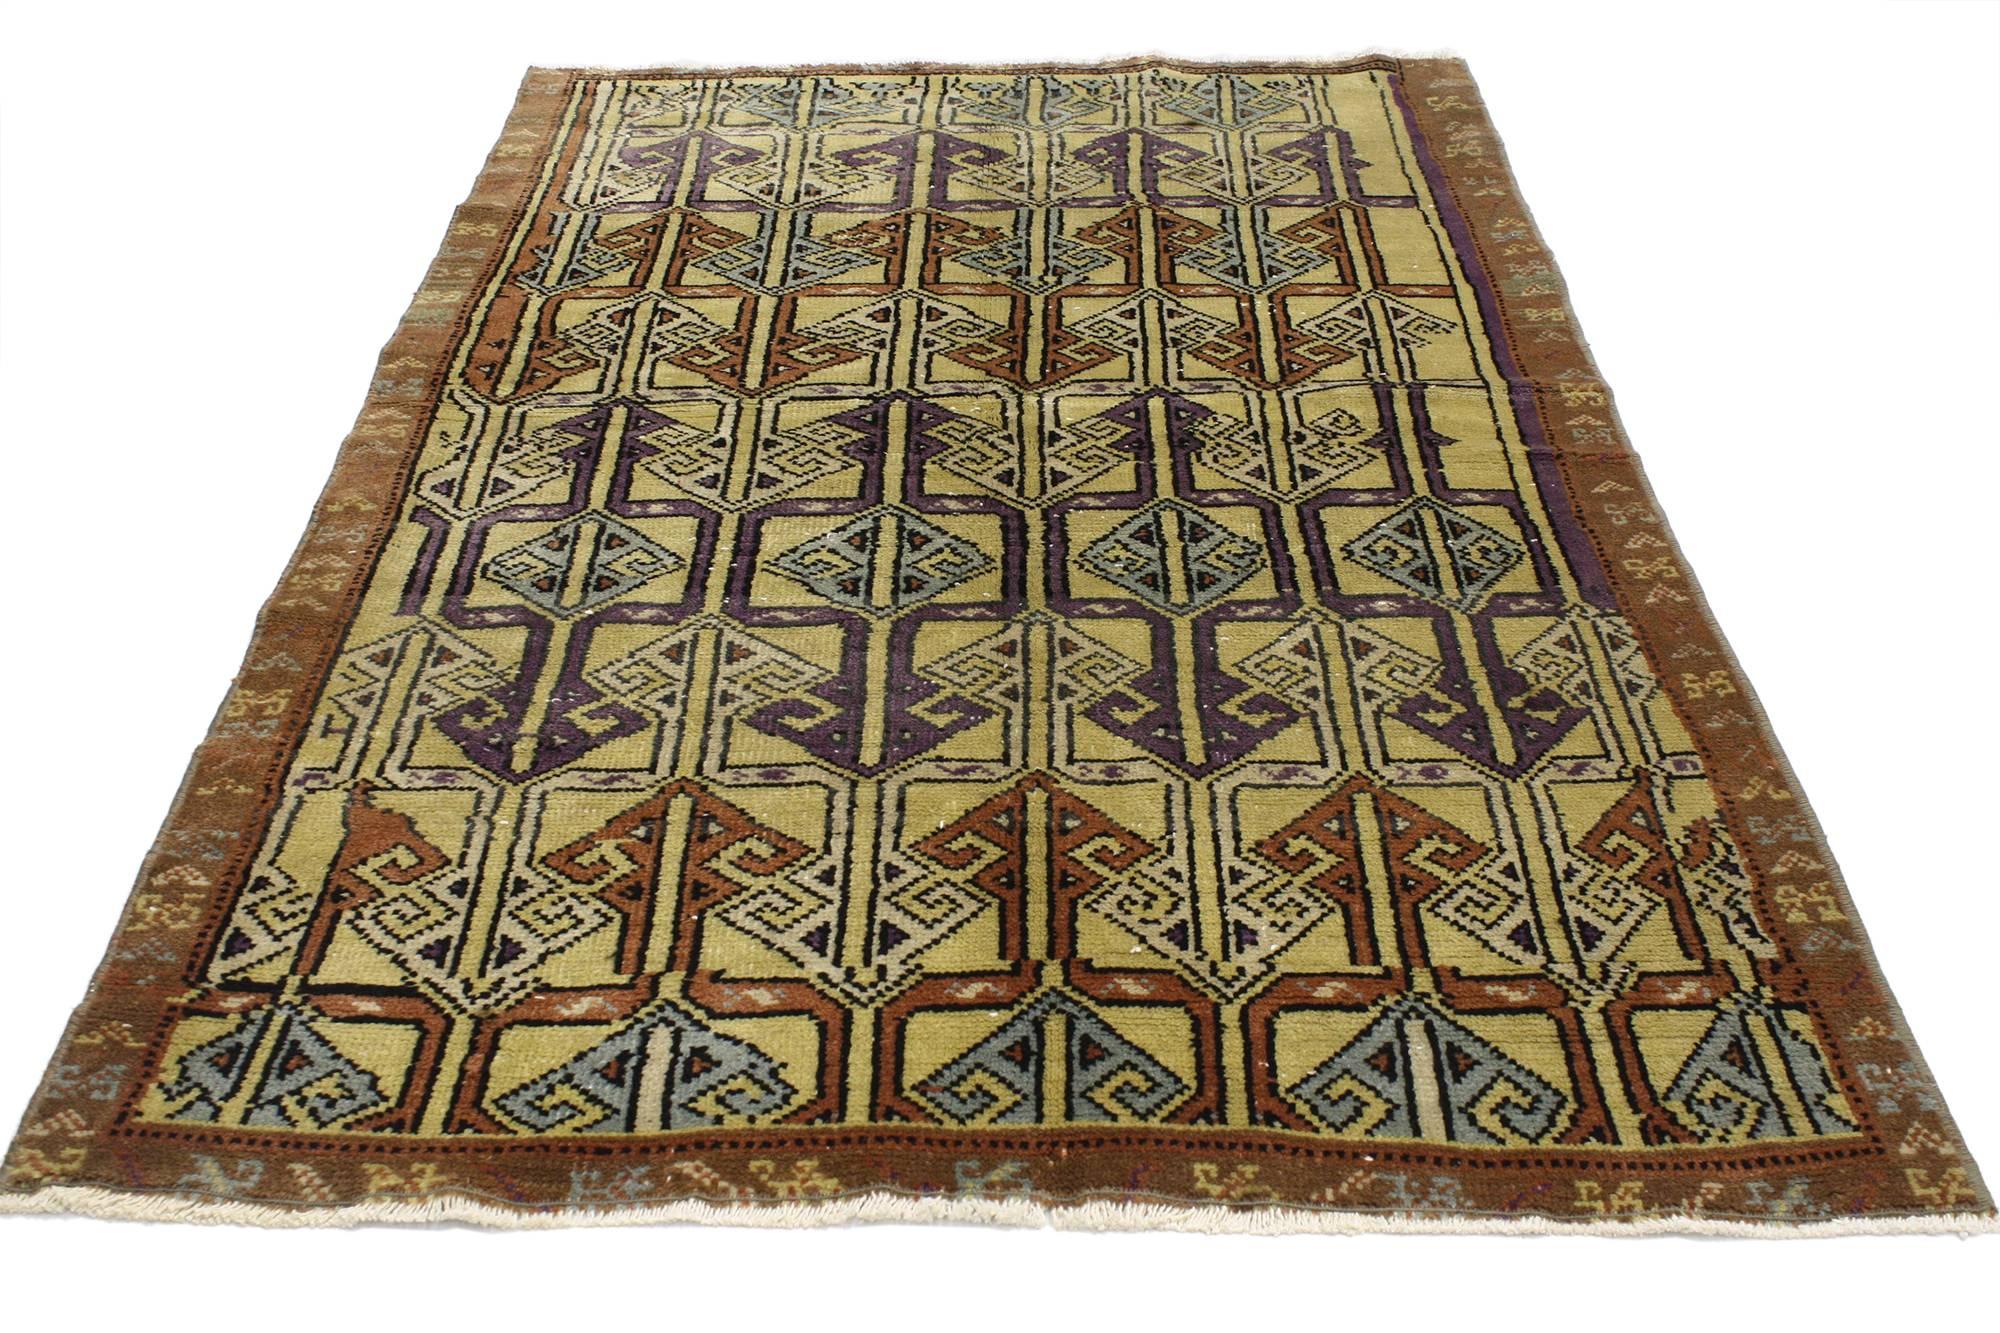 52076, vintage Turkish Oushak Accent rug, entry or foyer rug. This vintage Turkish Oushak rug features a modern traditional style and all-over pattern of ram horn motifs. Immersed in Anatolian history and refined colors, this vintage Oushak rug